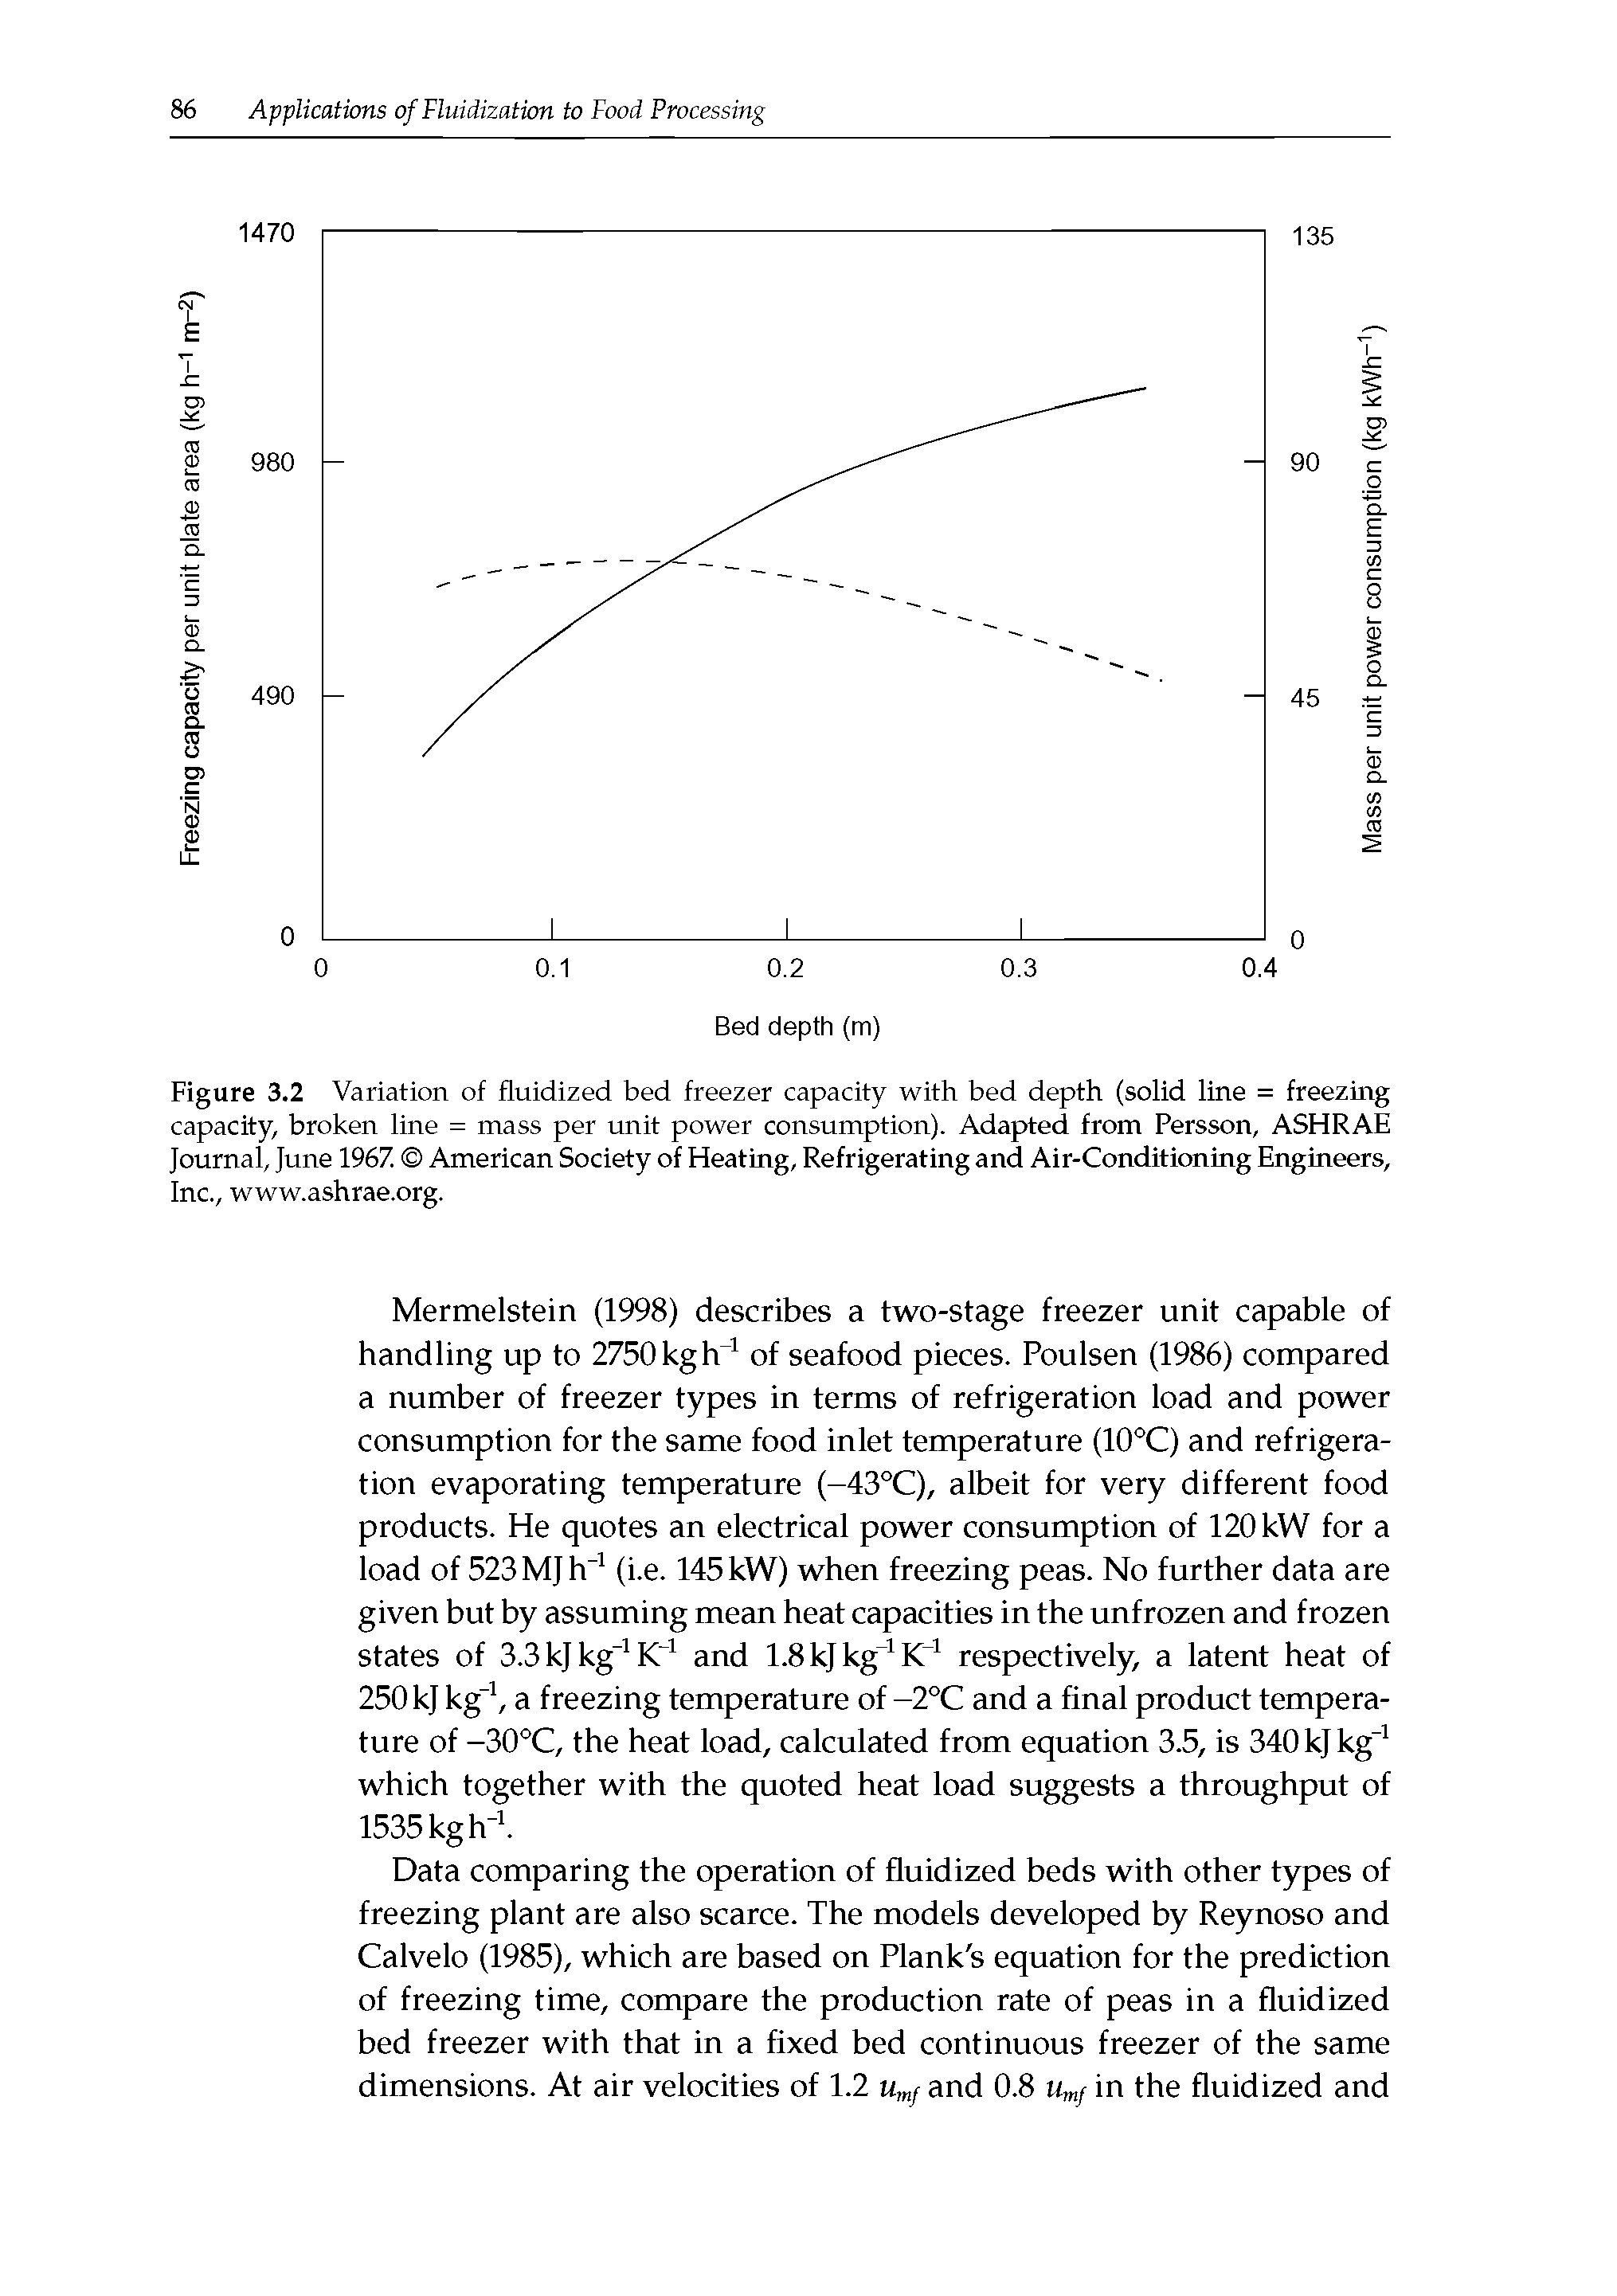 Figure 3.2 Variation of fluidized bed freezer capacity with bed depth (solid line = freezing capacity, broken line = mass per unit power consumption). Adapted from Persson, ASHRAE Journal, June 1967. American Society of Heating, Refrigerating and Air-Conditioning Engineers, Inc., www.ashrae.org.